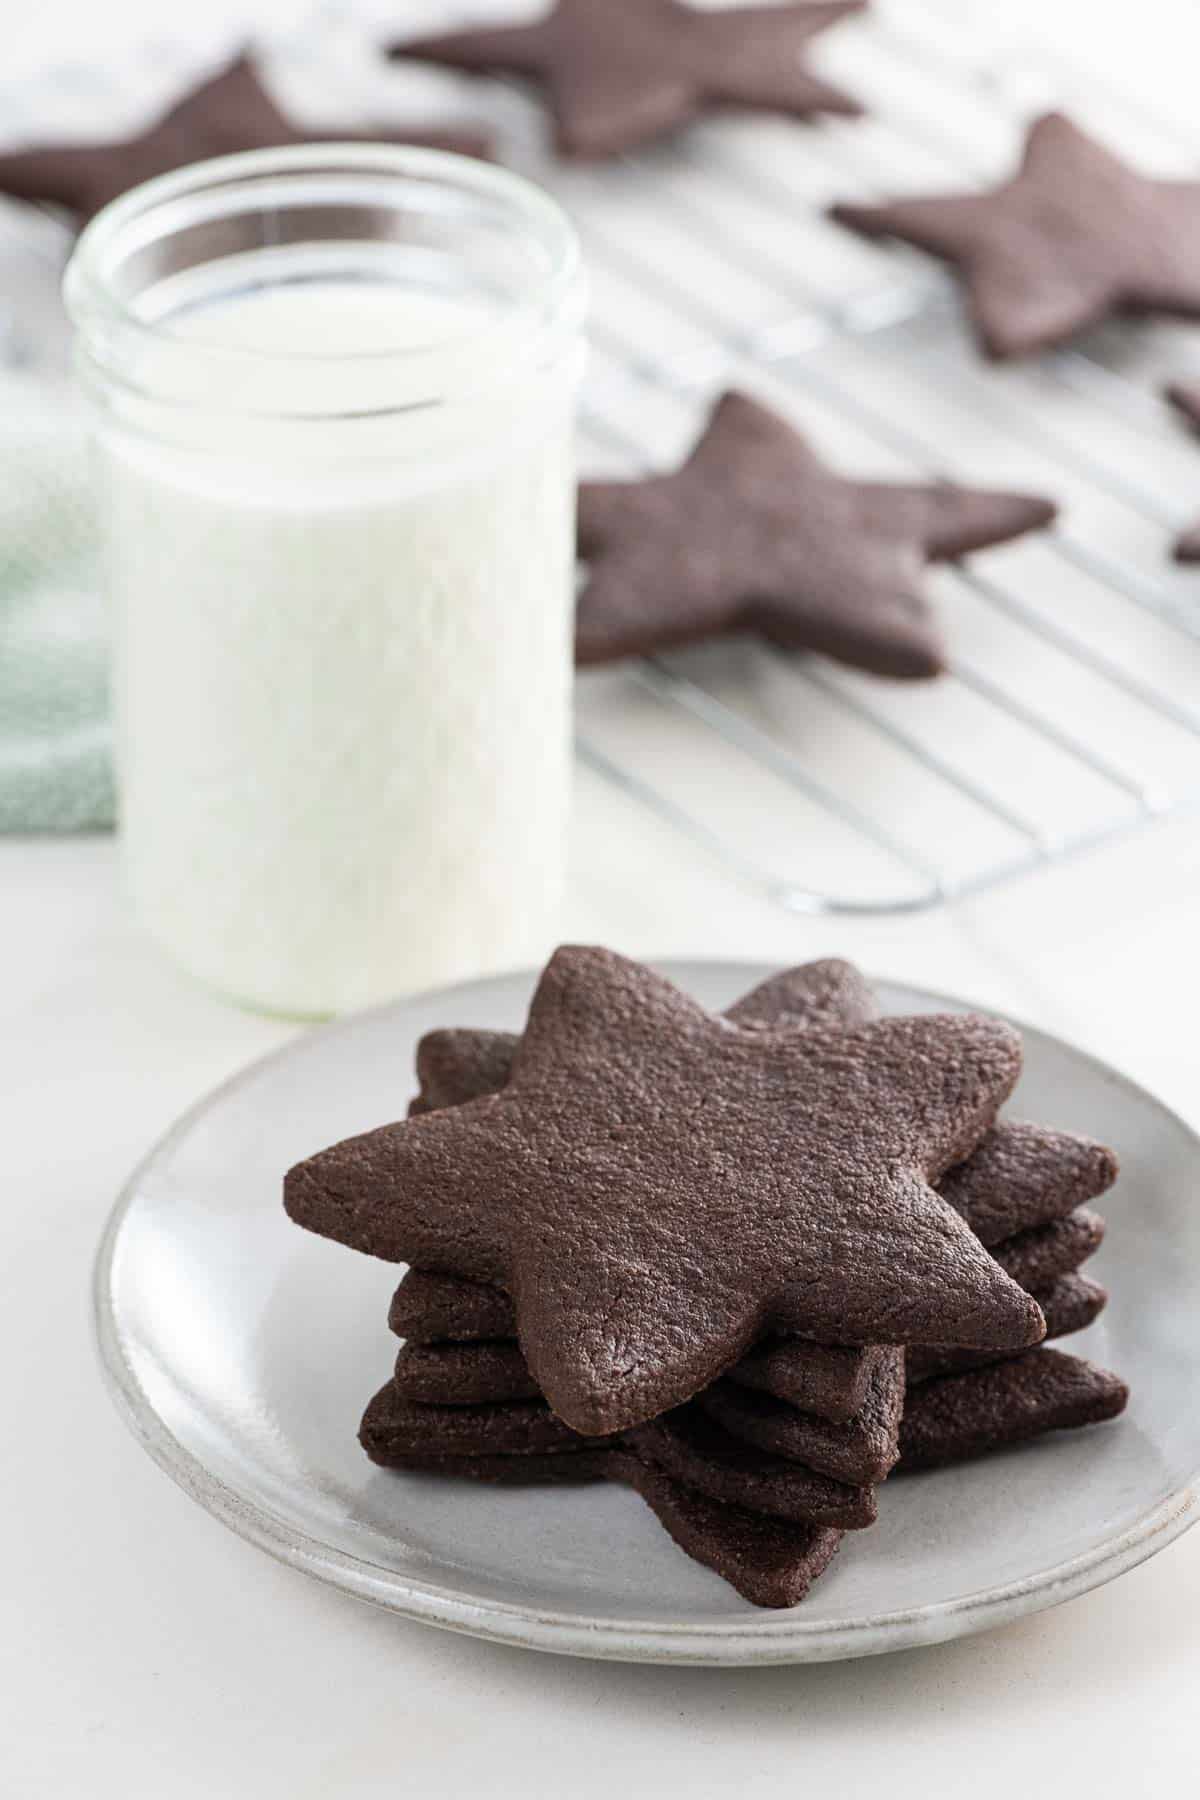 star-shaped chocolate sugar cookies and a glass of milk